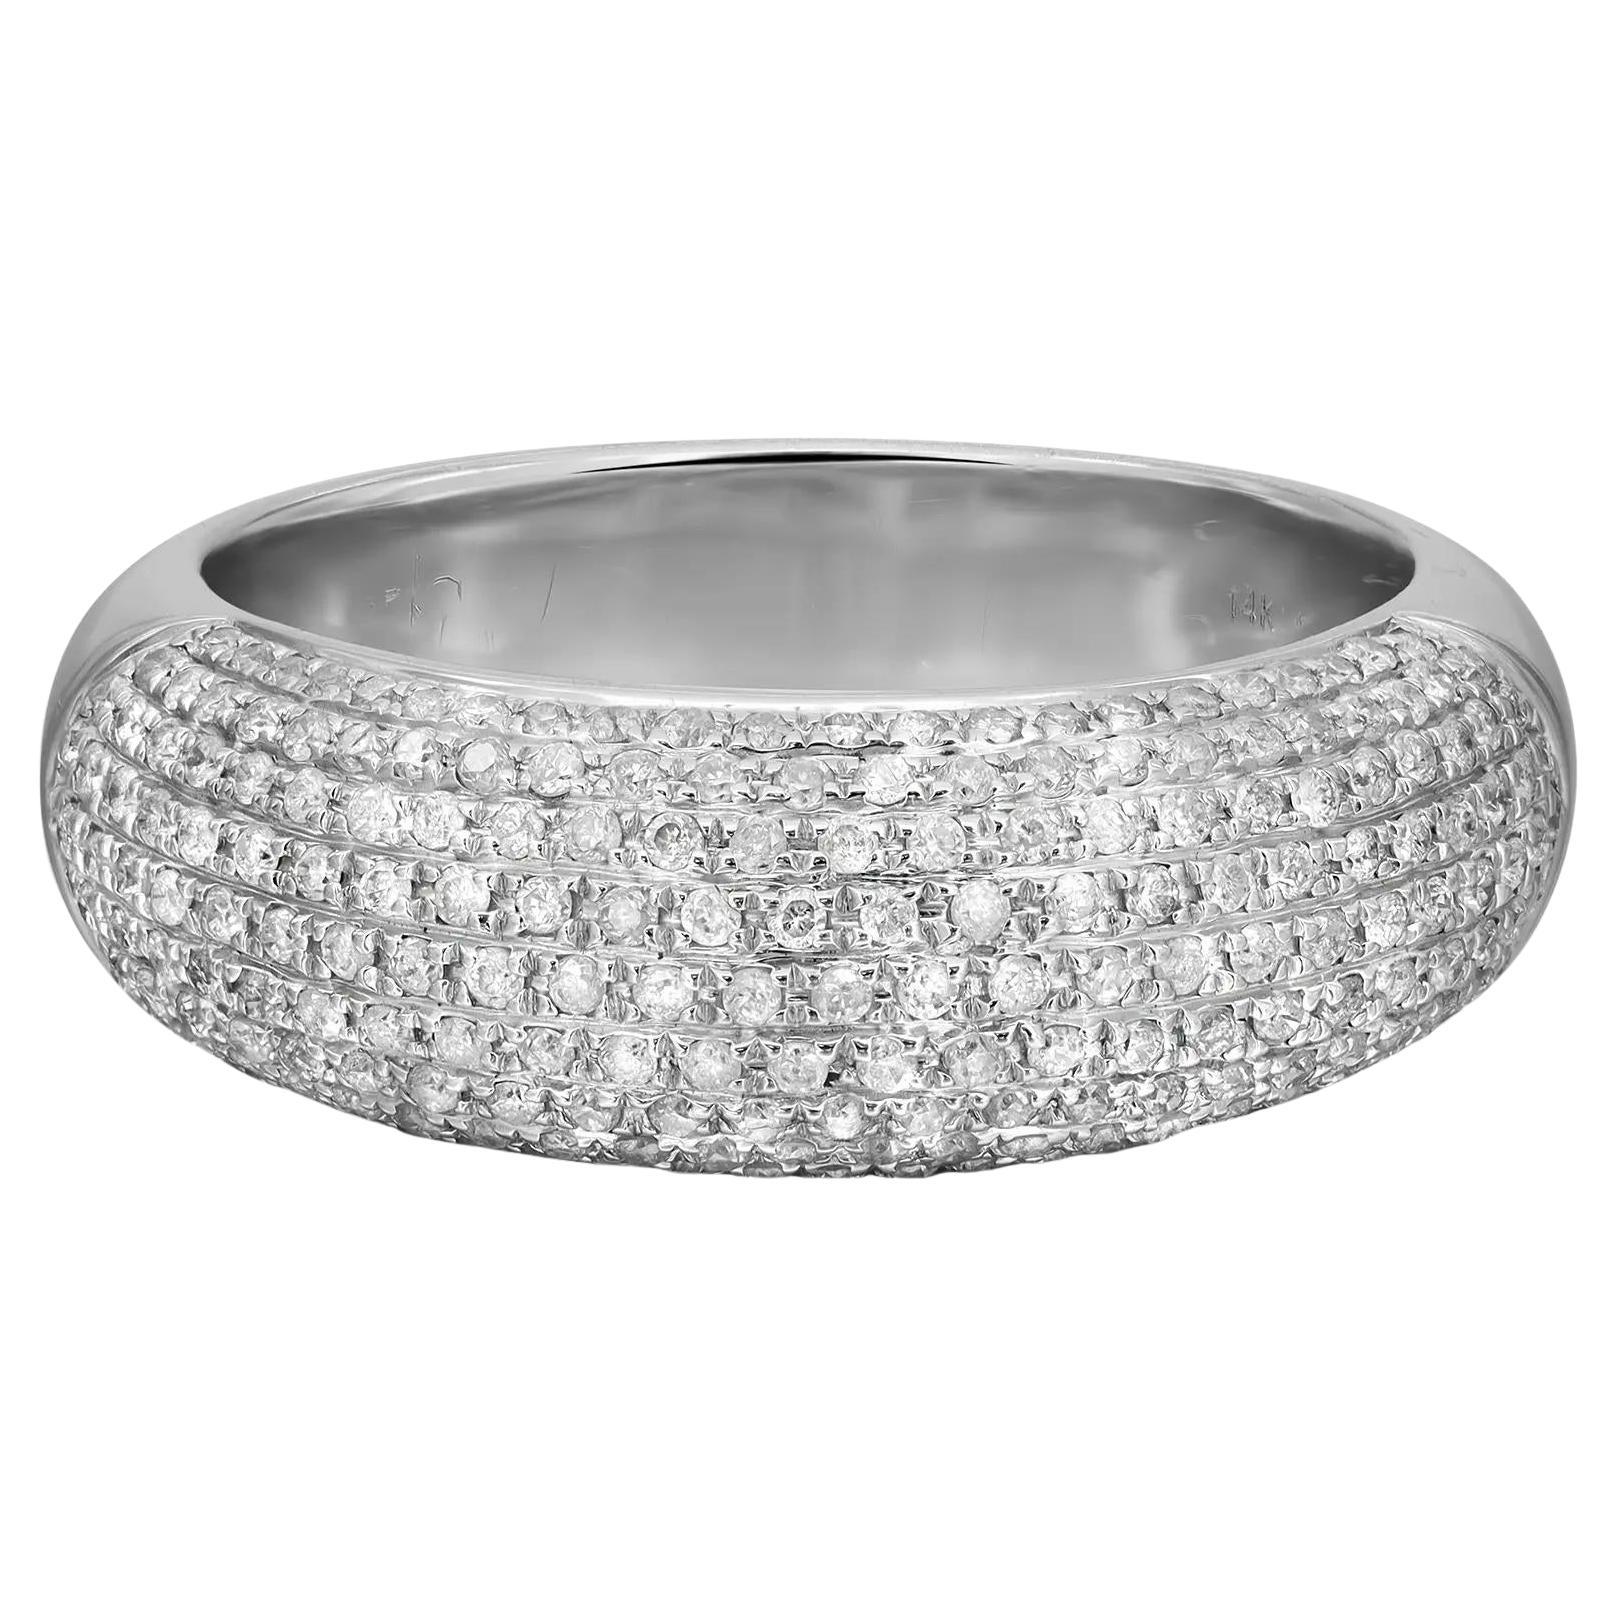 0.69Cttw Pave Set Round Diamond Ladies Band Ring 14K WHite Gold Size 8 For Sale